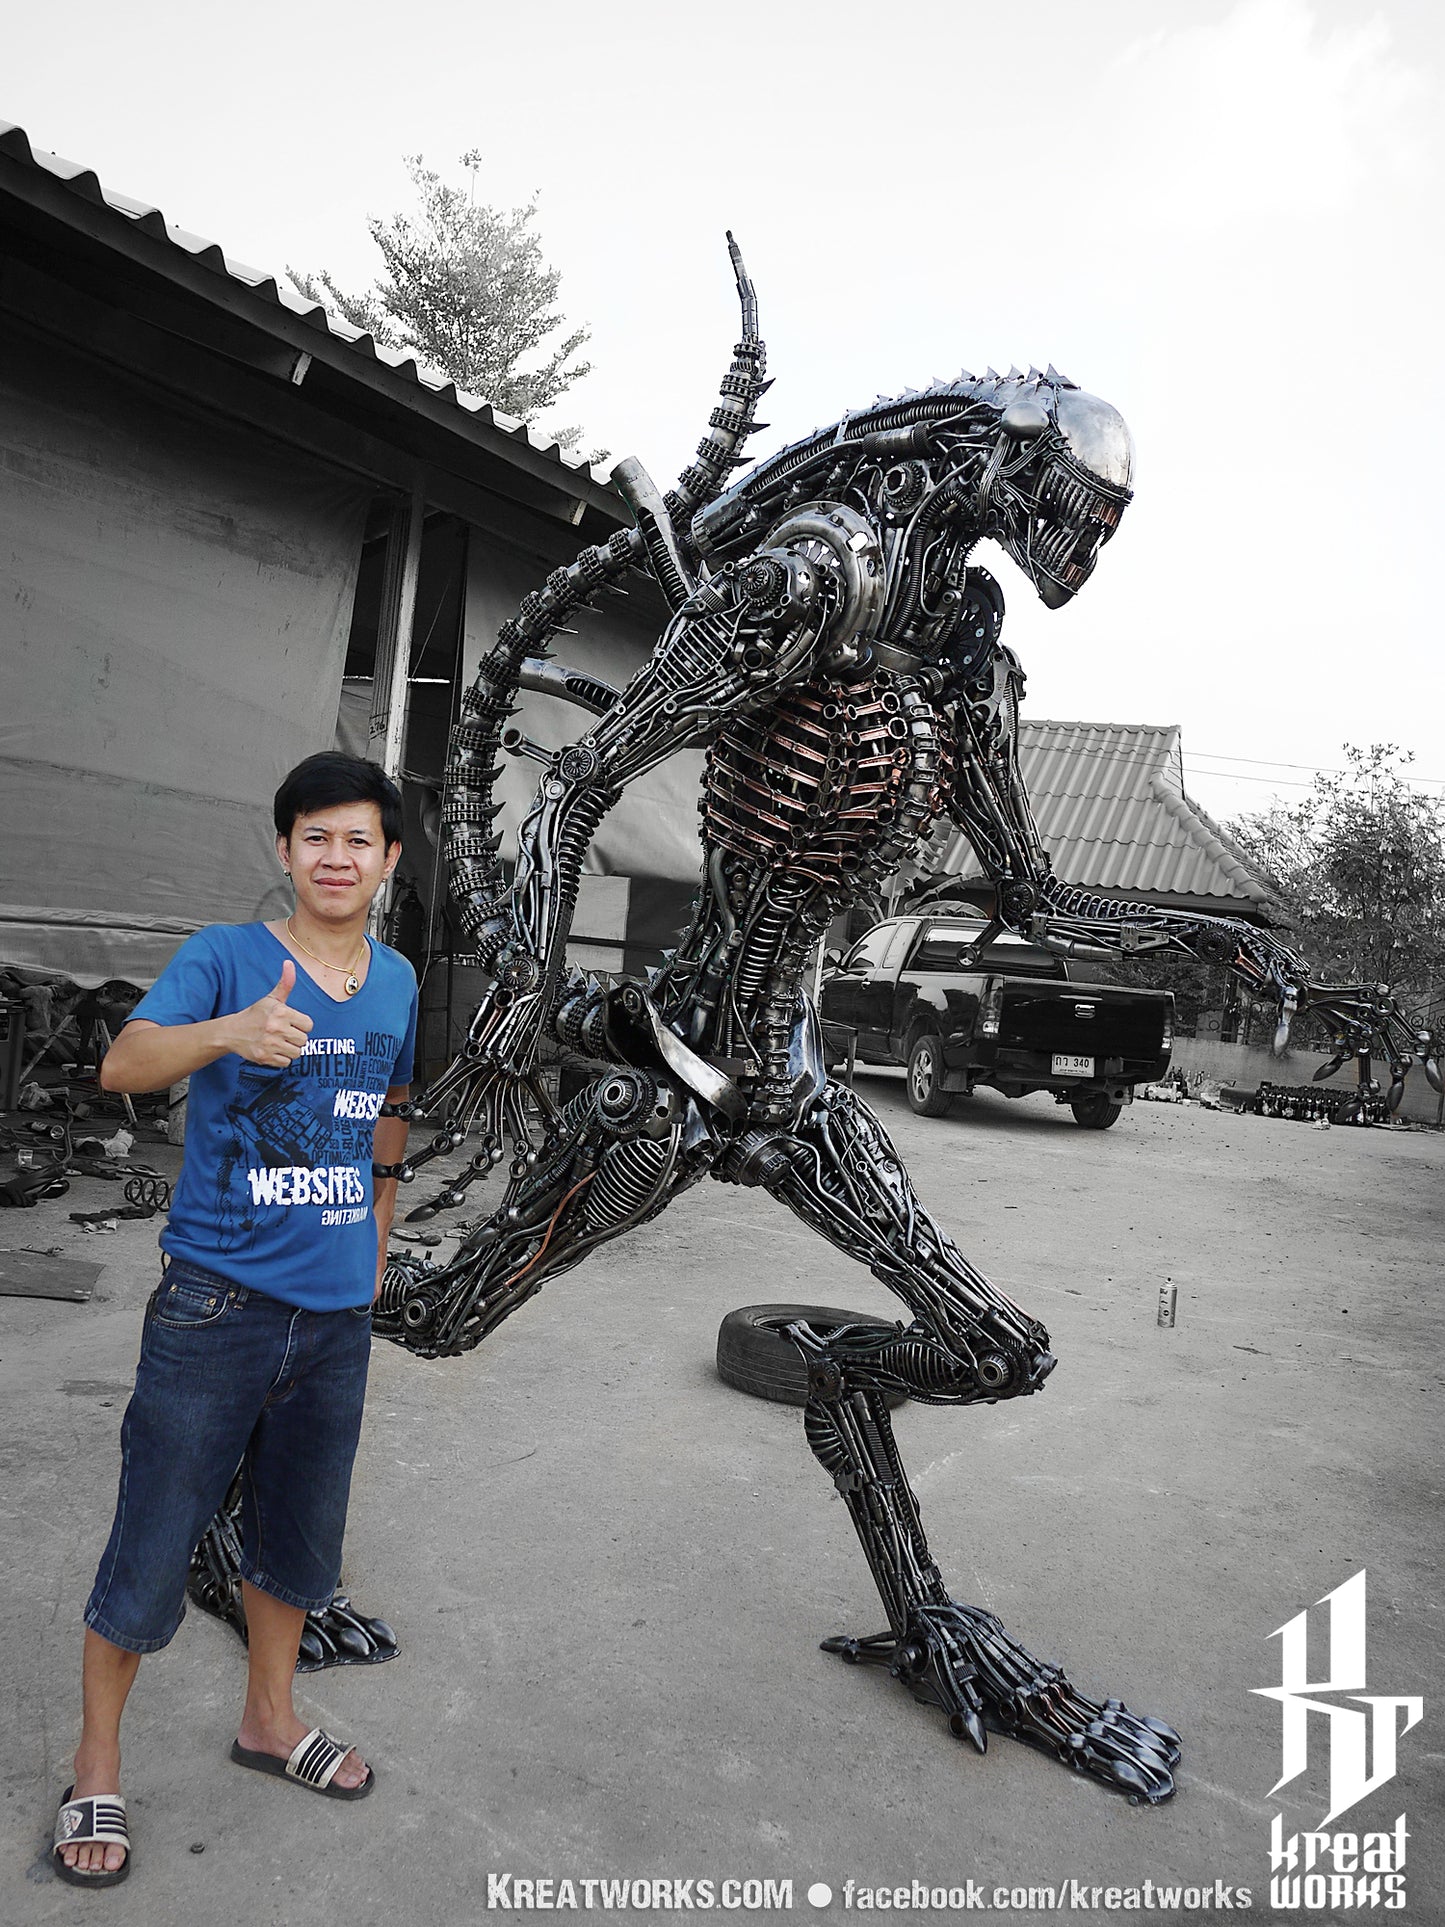 Biomechanical Recycled Metal Monster (made-to-order) / Recycle Metal Sustainable Sculpture Art